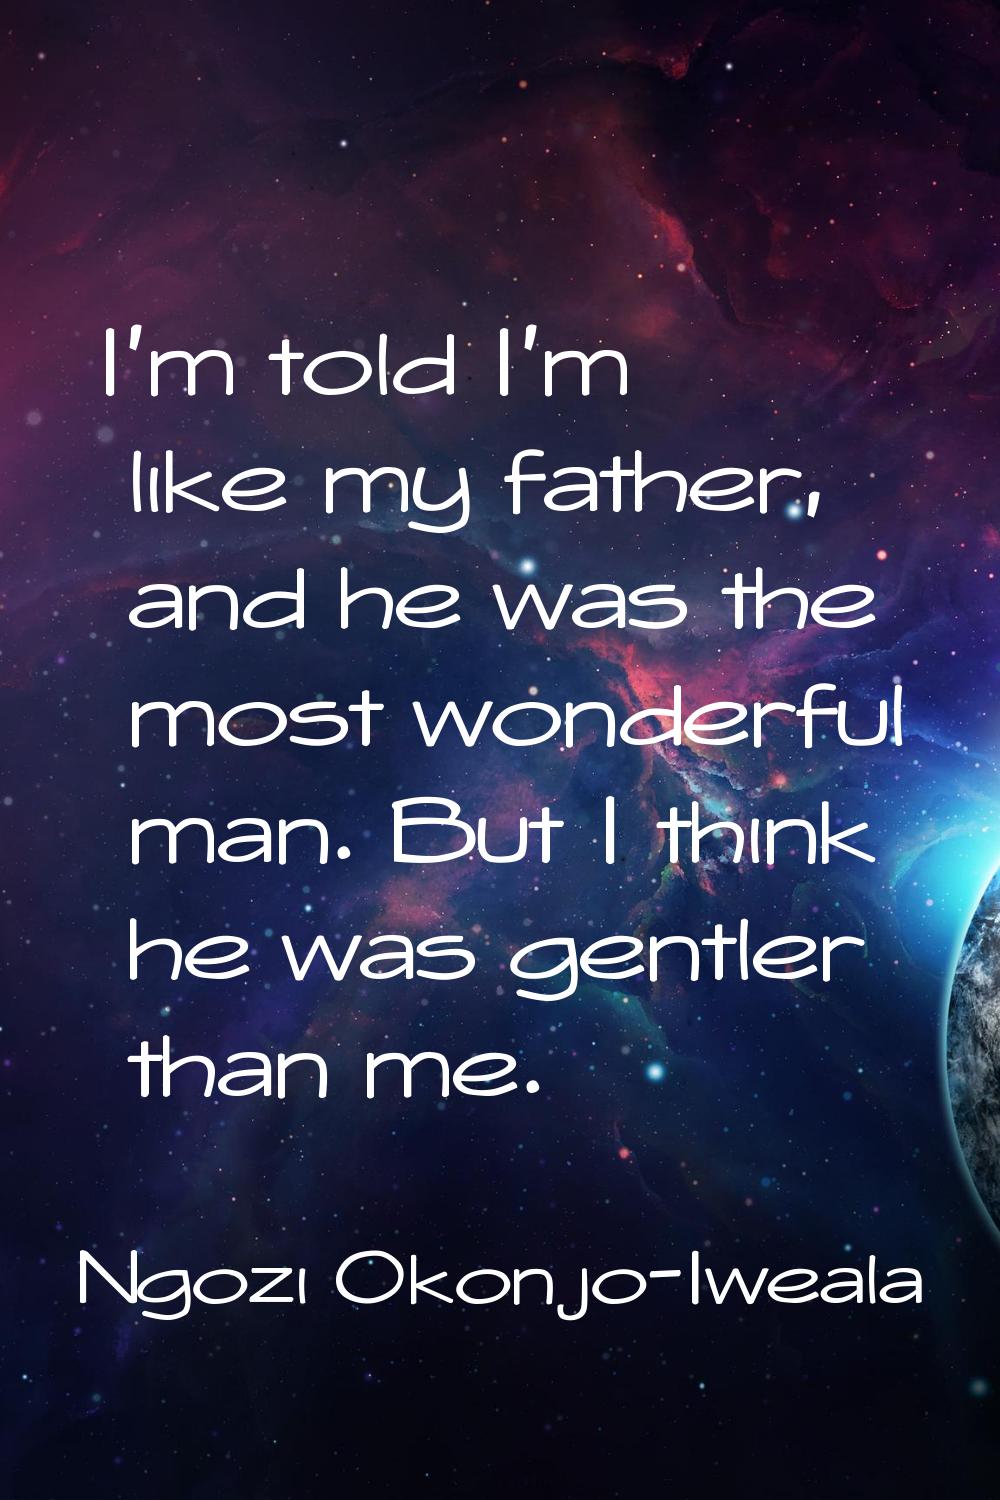 I'm told I'm like my father, and he was the most wonderful man. But I think he was gentler than me.